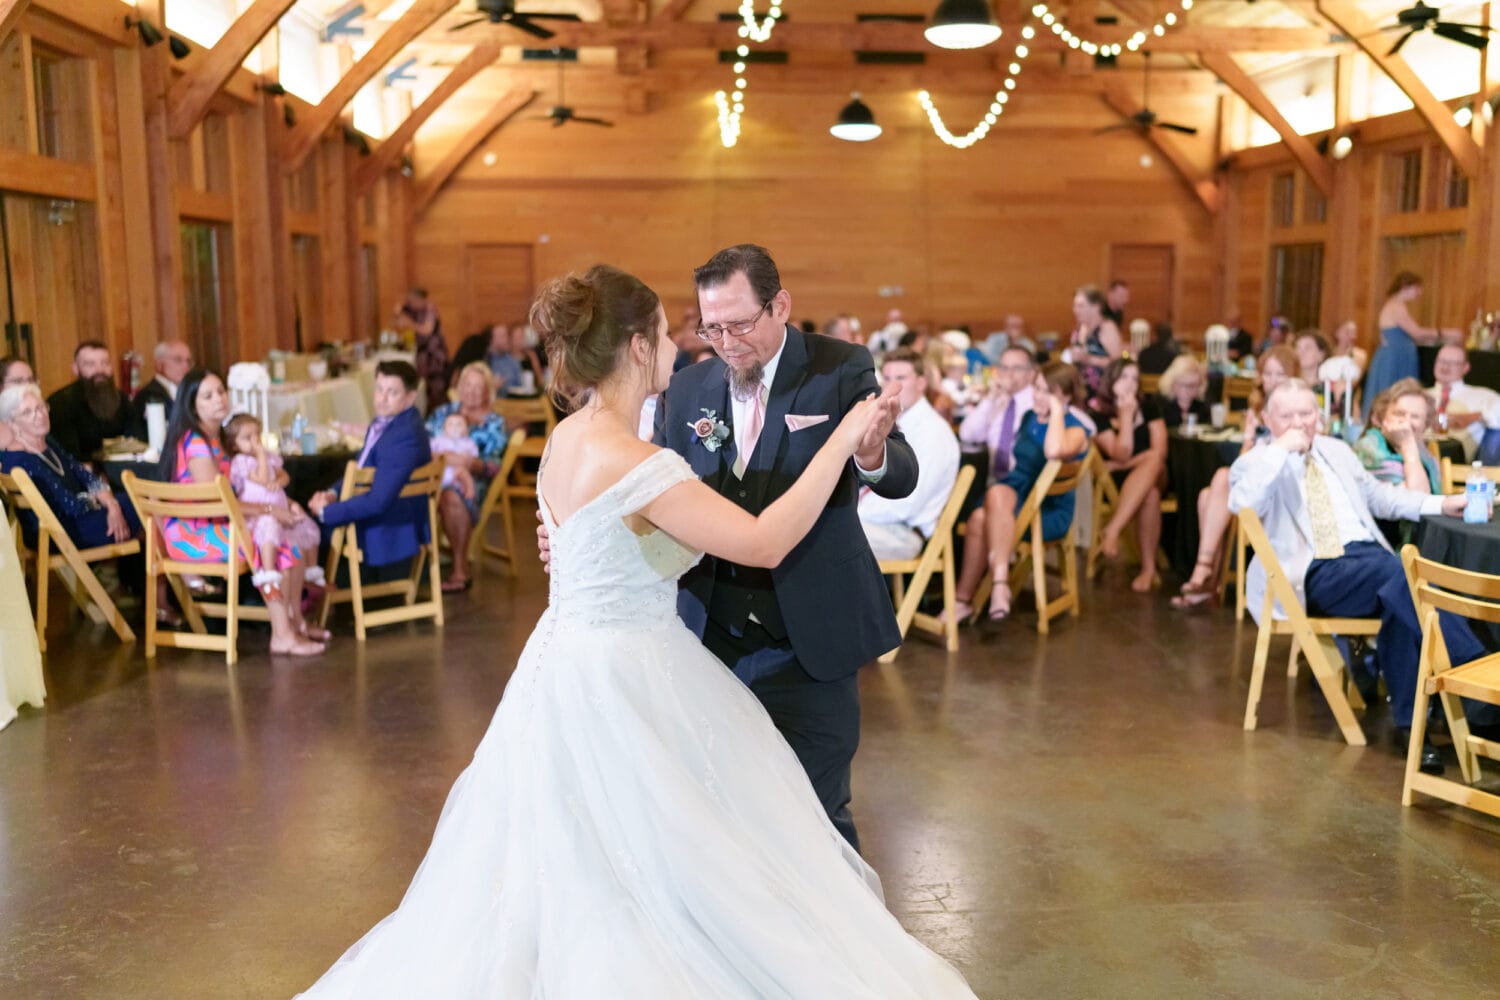 Bride dancing with her father - The Pavilion at Pepper Plantation